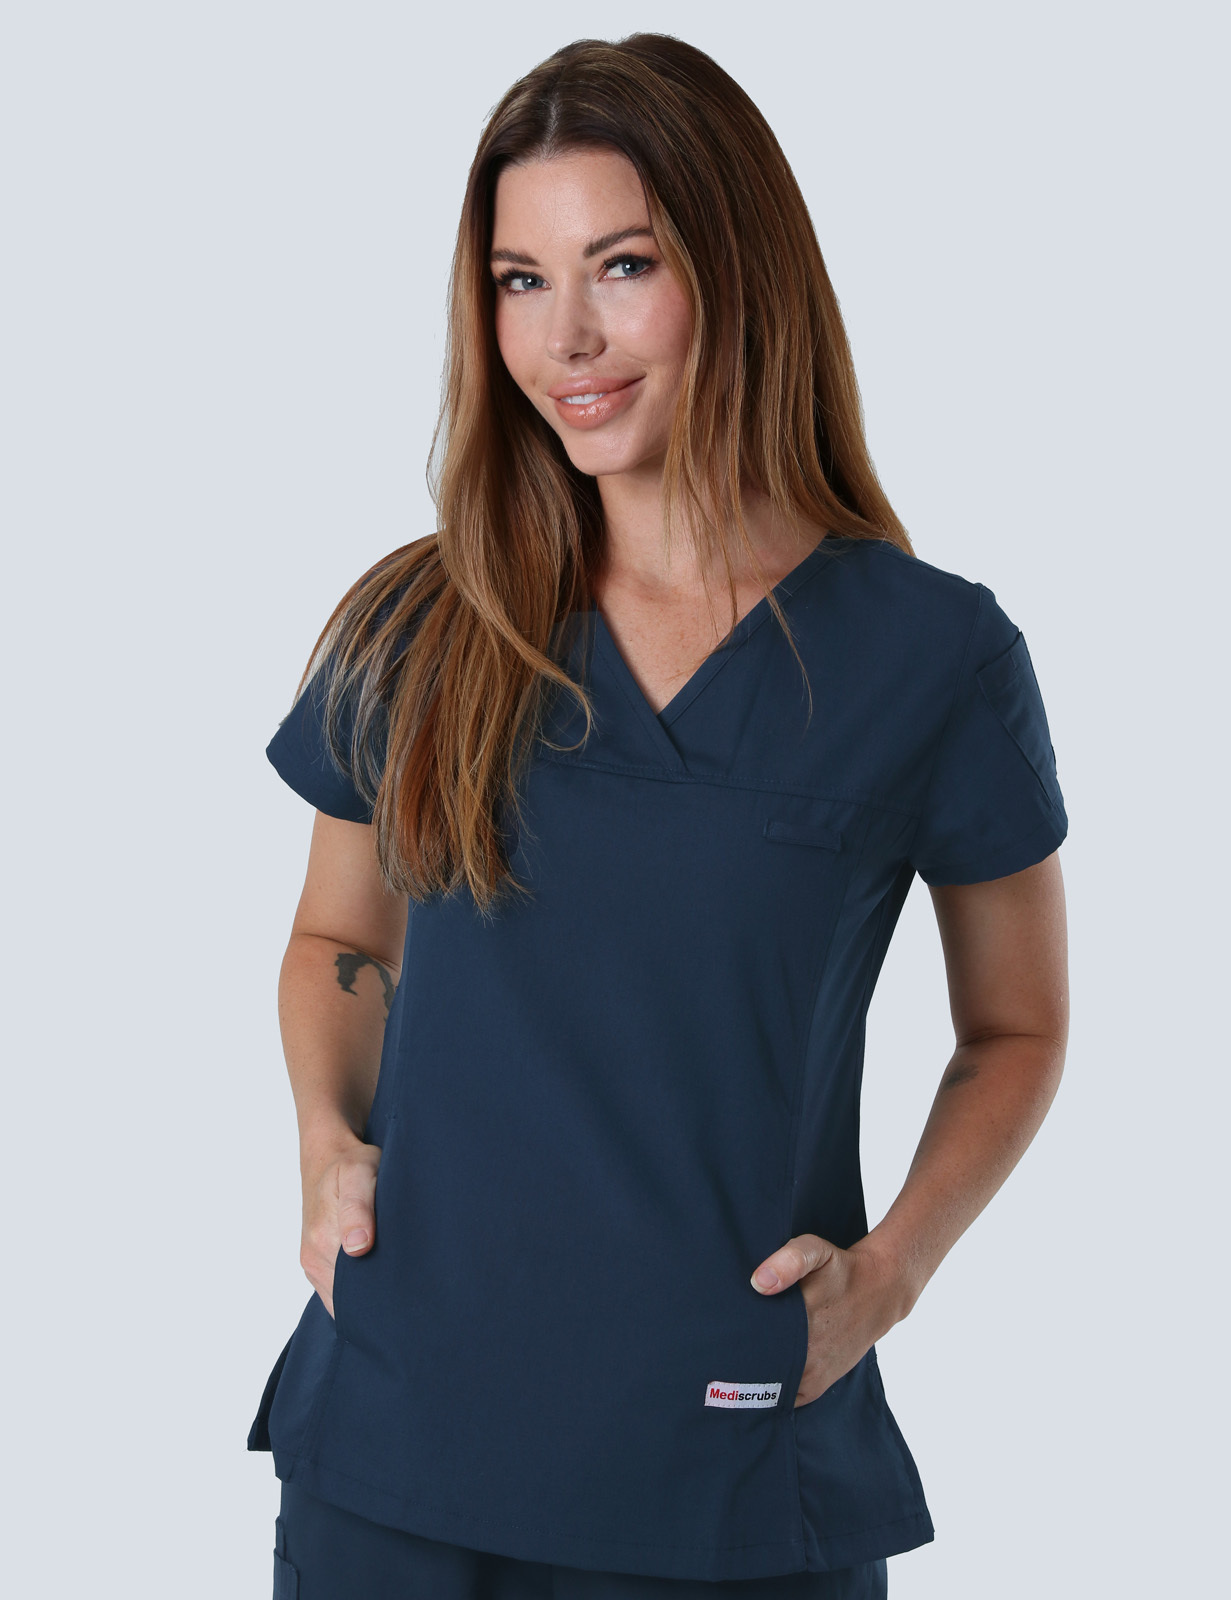 Weipa Hospital - ED AIN (Women's Fit Solid Scrub Top and Cargo Pants in Navy incl Logos)